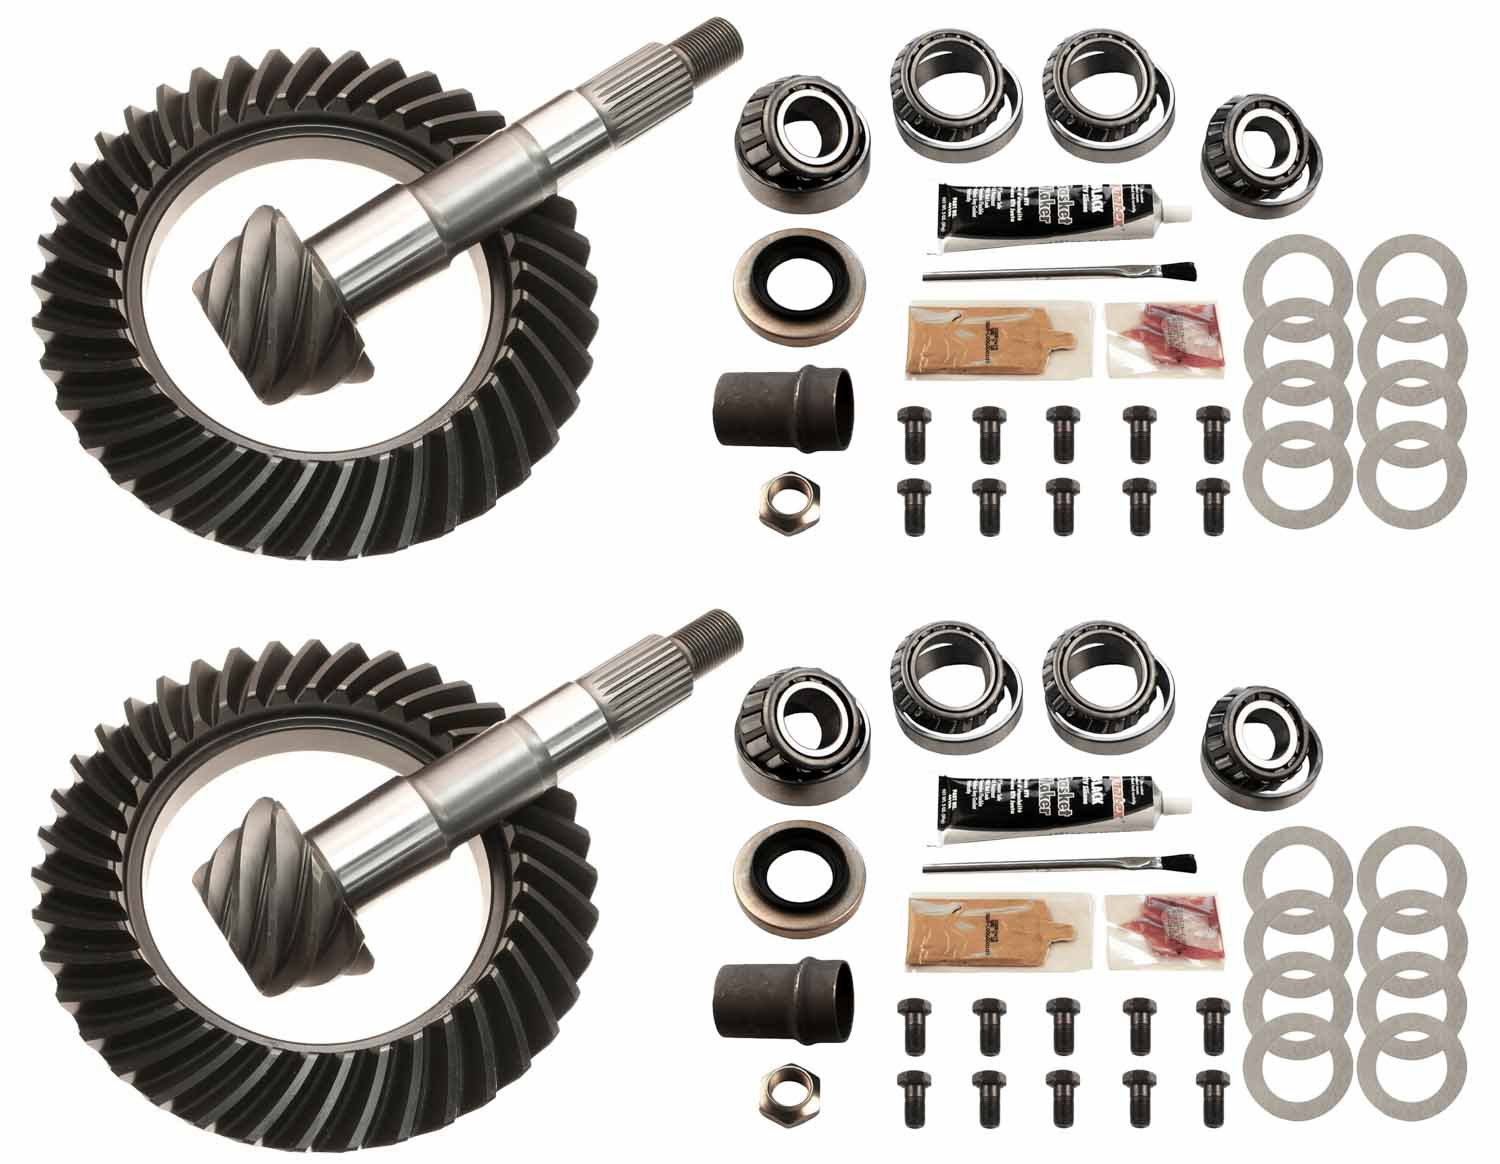 Complete Front and Rear Ring and Pinion Kit 1979-1985 Toyota Pickup 4-Cylinder, 1984-1985 Toyota 4Runner 4-Cylinder - 5:29 Ratio